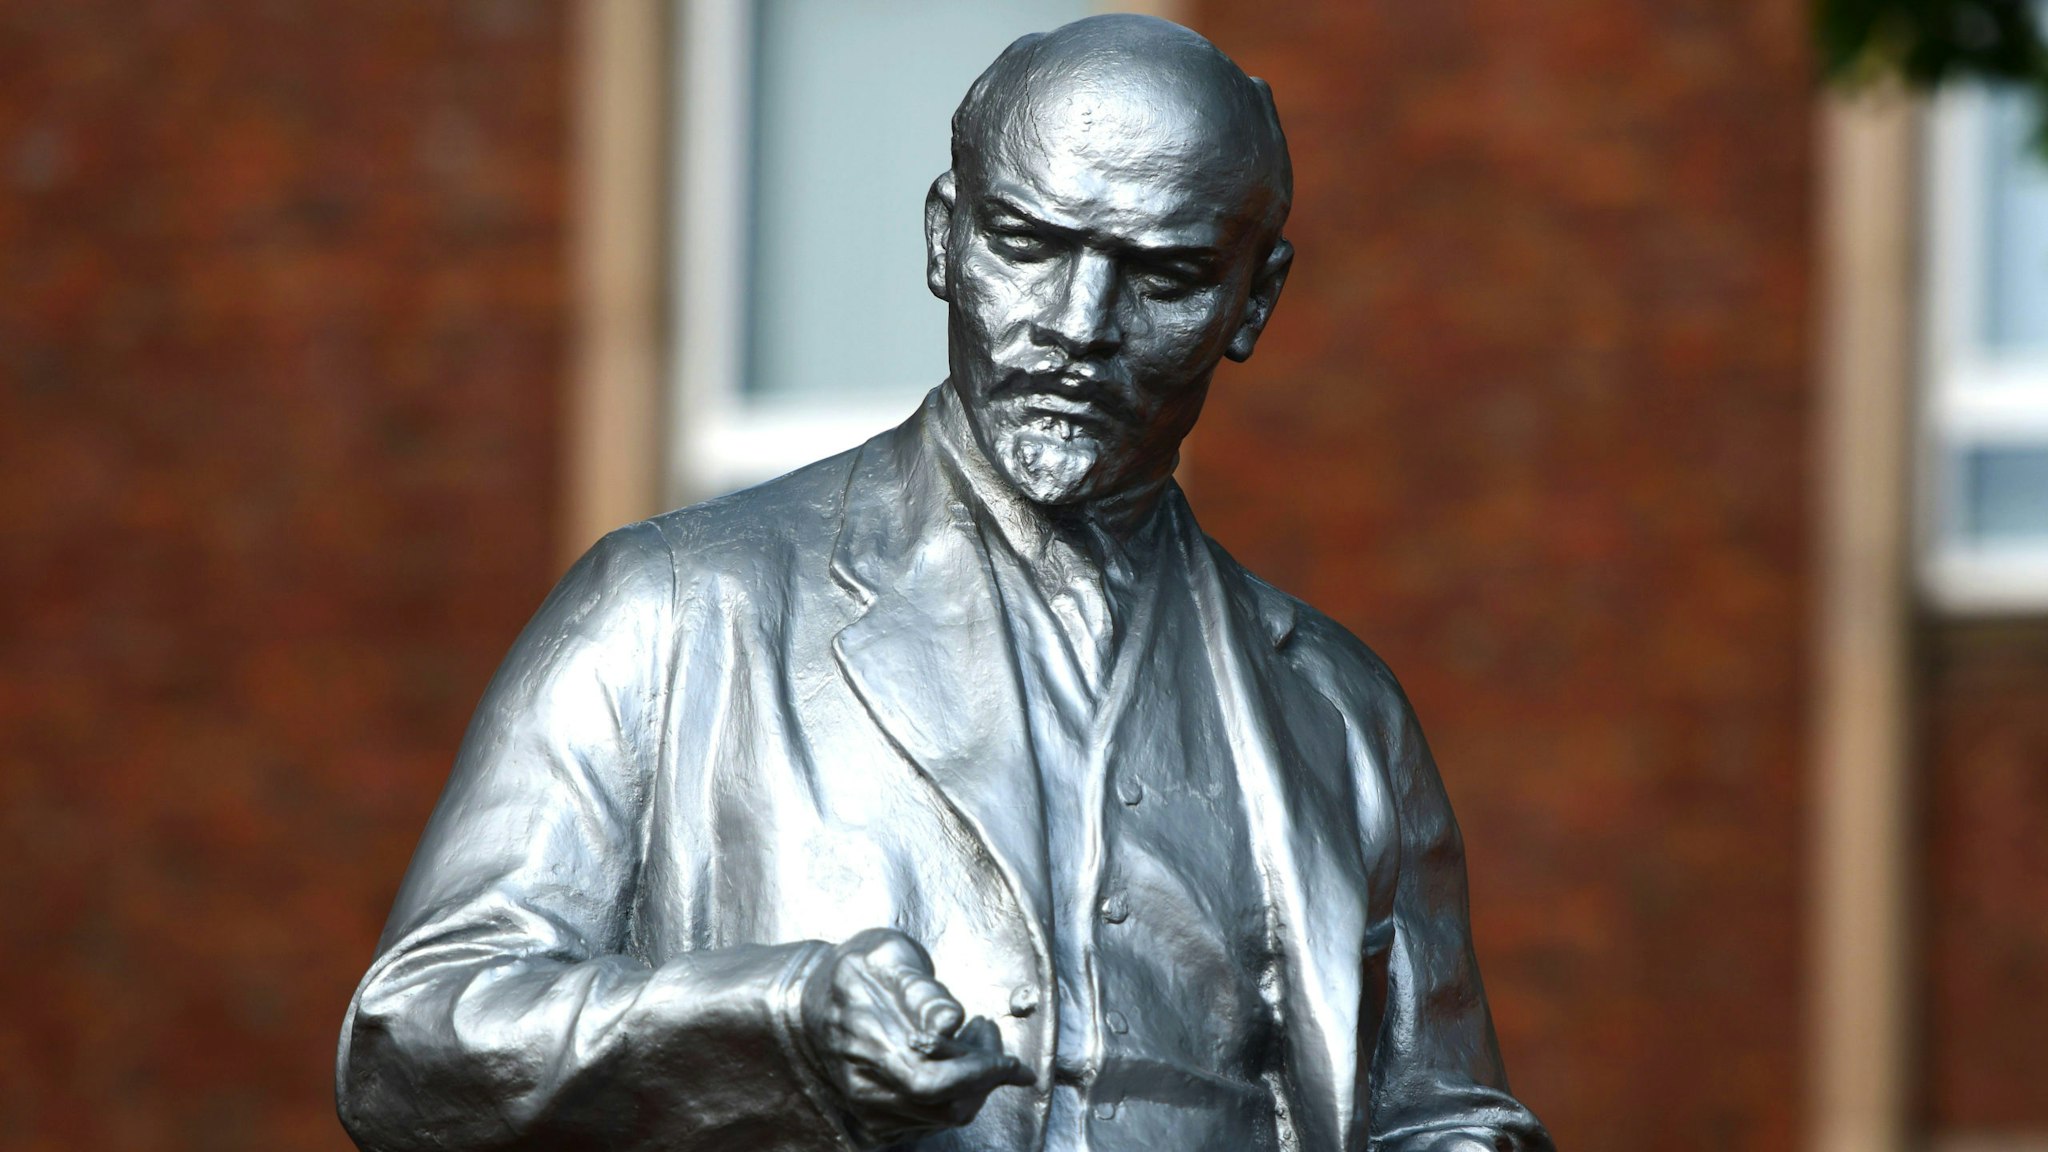 Picture taken on June 22, 2020 shows a statue of Soviet leader Vladimir Lenin recently erected in Gelsenkirchen, western Germany. - The divisive new monument was unveiled on June 20, 2020, in the middle of a global row over the controversial background of historical figures immortalised as statues. More than 30 years after the post-World War II communist experiment on German soil ended, the tiny Marxist-Leninist Party of Germany (MLPD) installed Lenin's likeness in the western city of Gelsenkirchen.